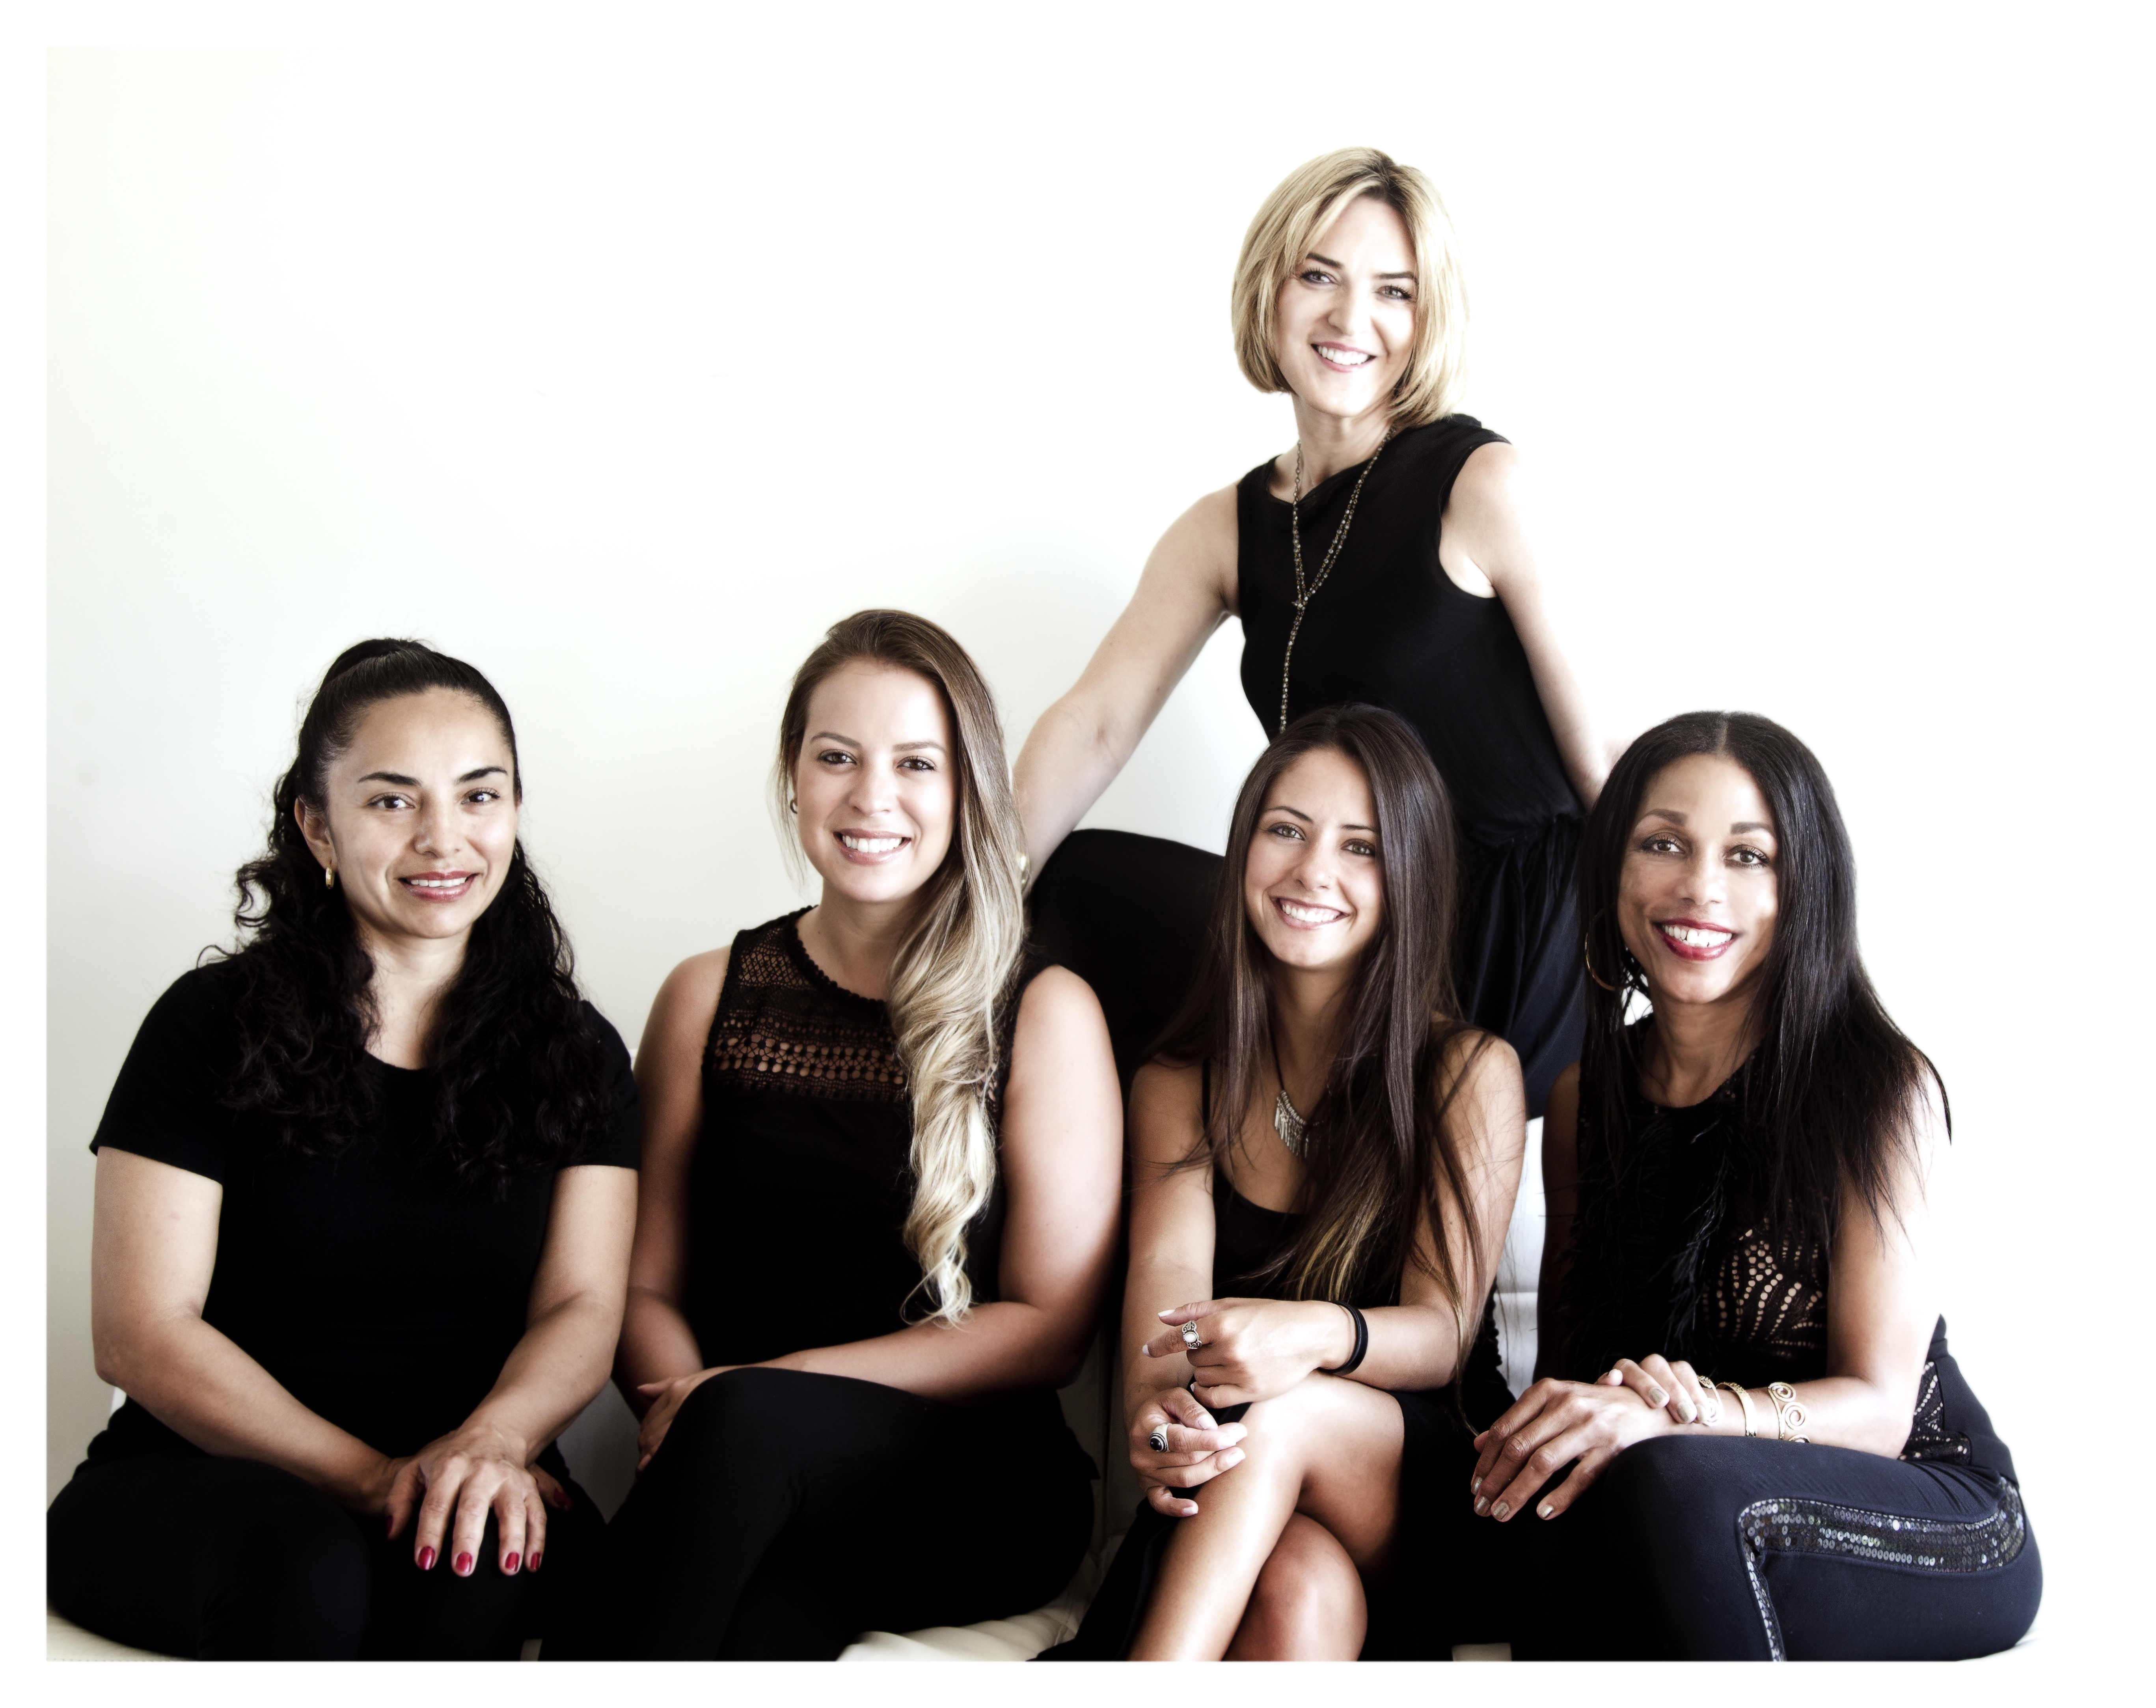 Eden McCracken, far right, with her team of lead home stylists, from left, Veronica, Mariana, Isabelle, and Sheri.